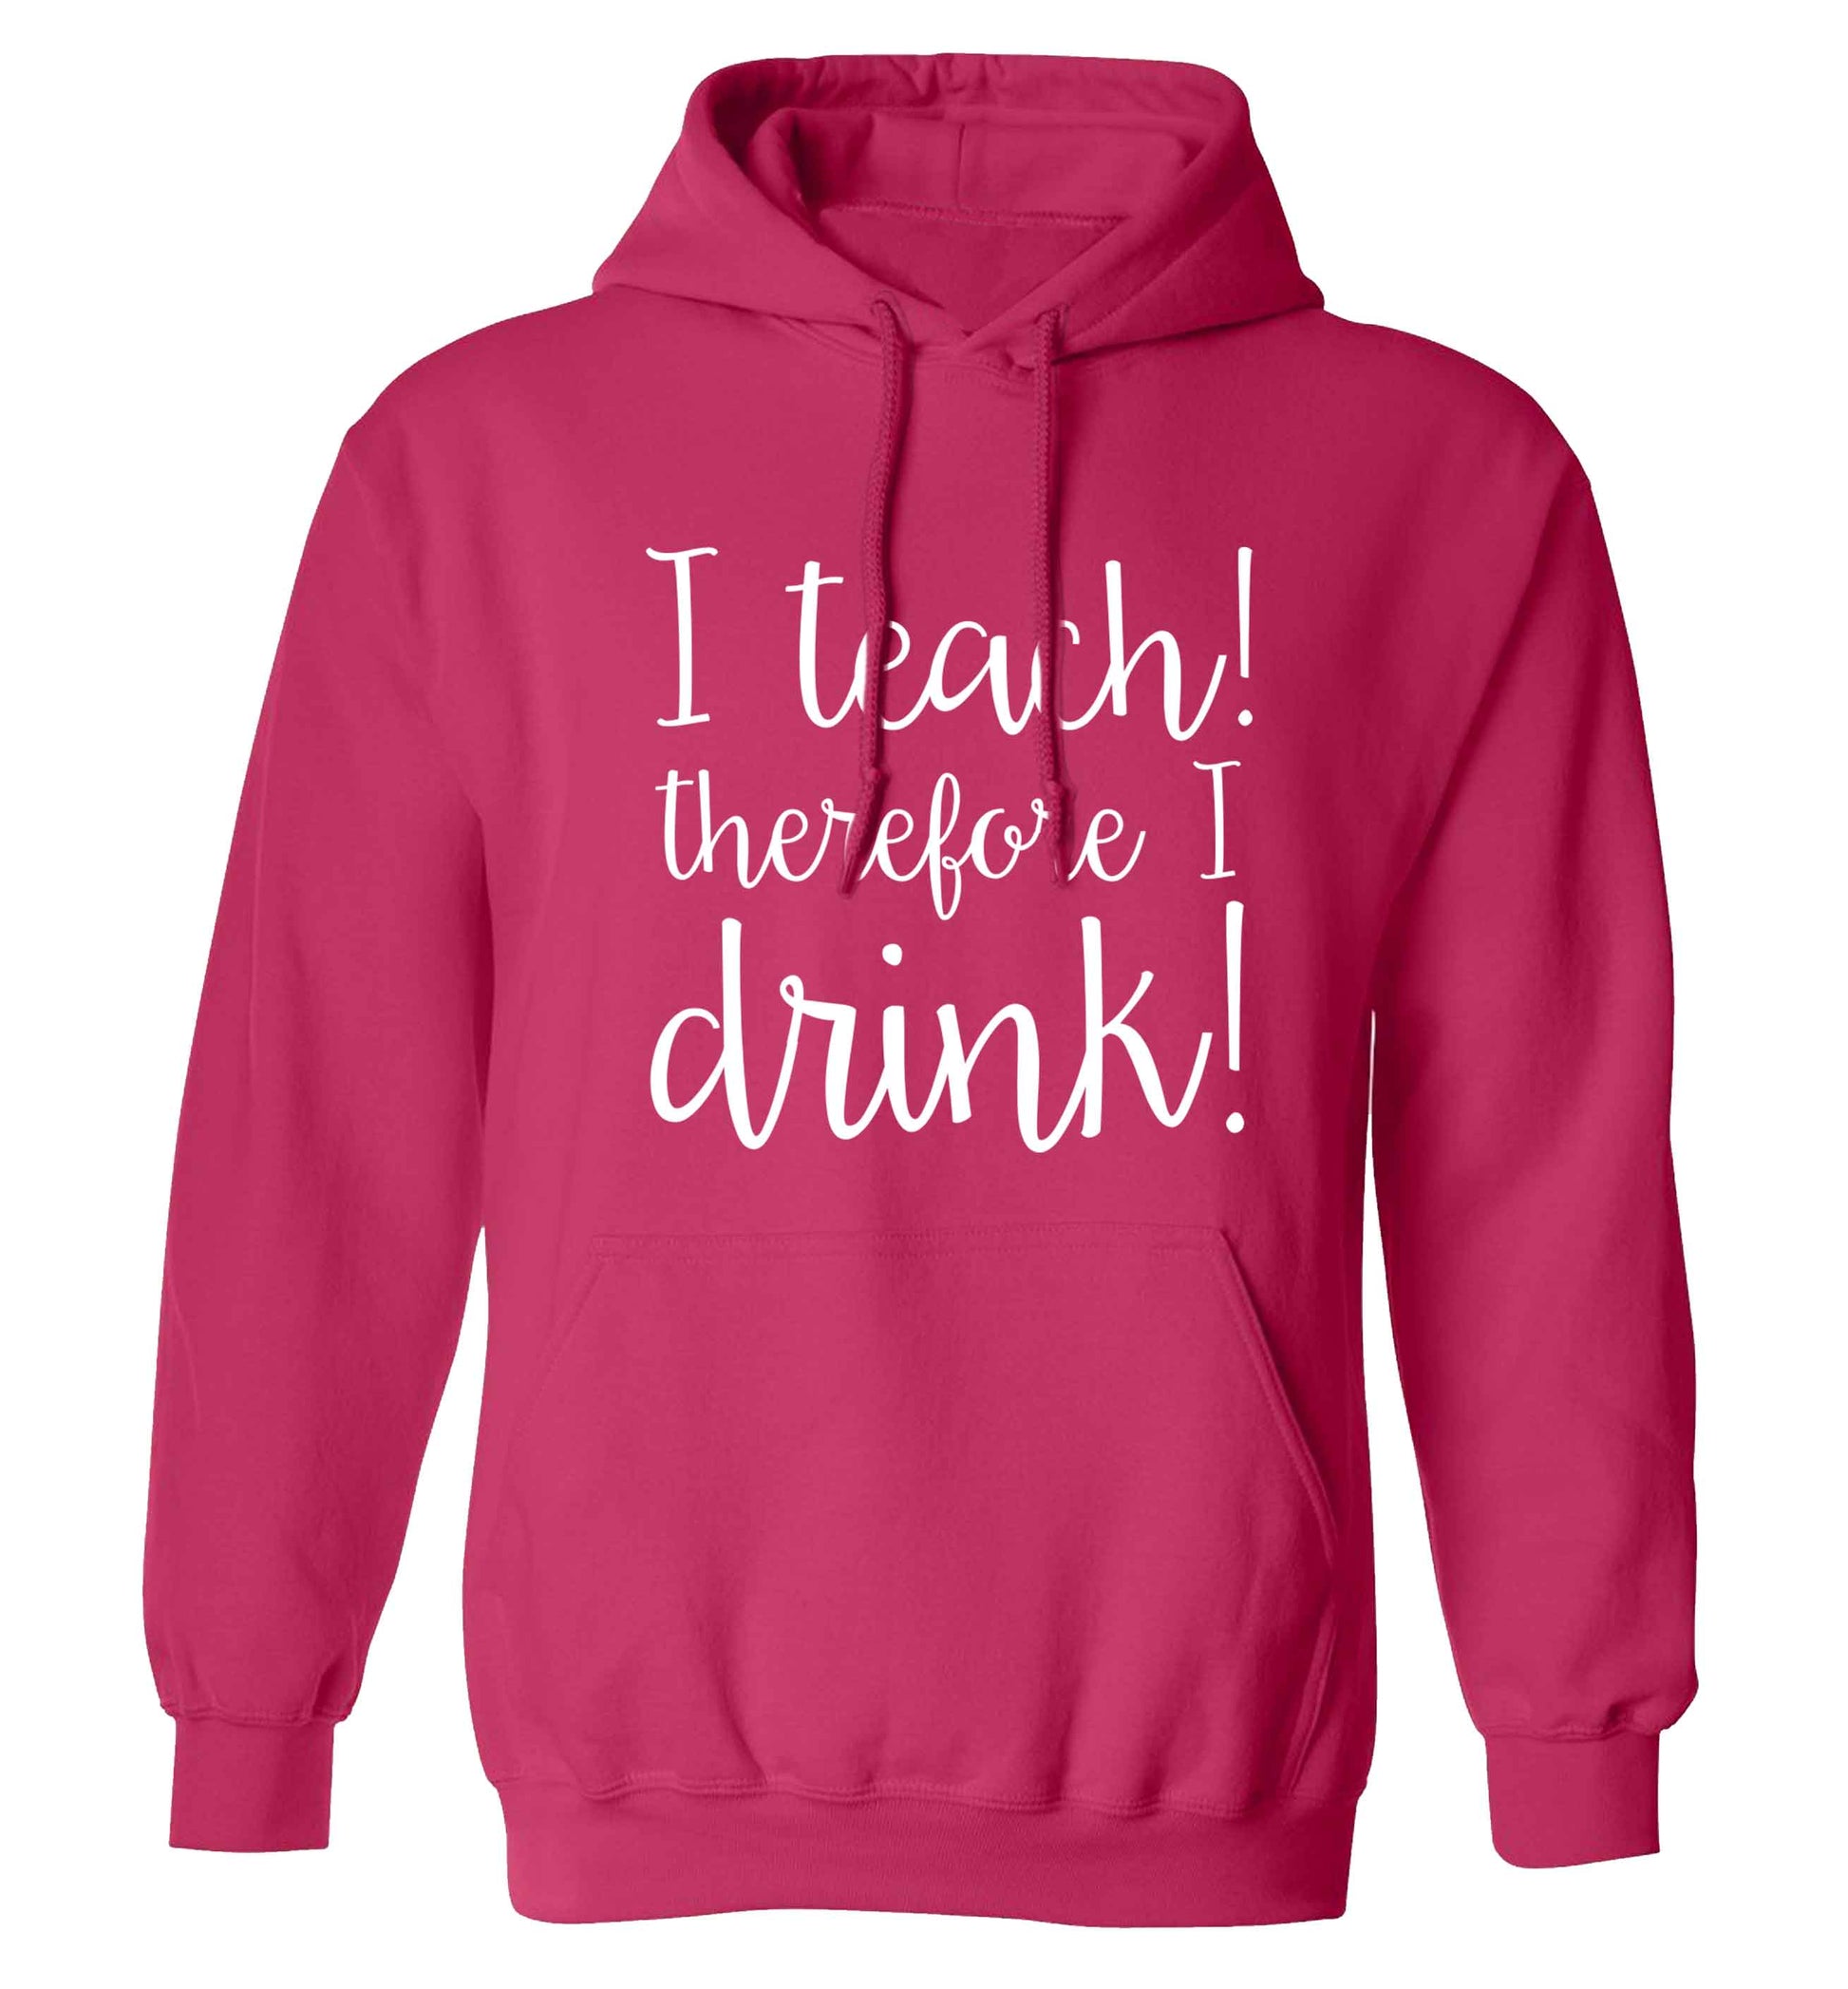 I teach therefore I drink adults unisex pink hoodie 2XL